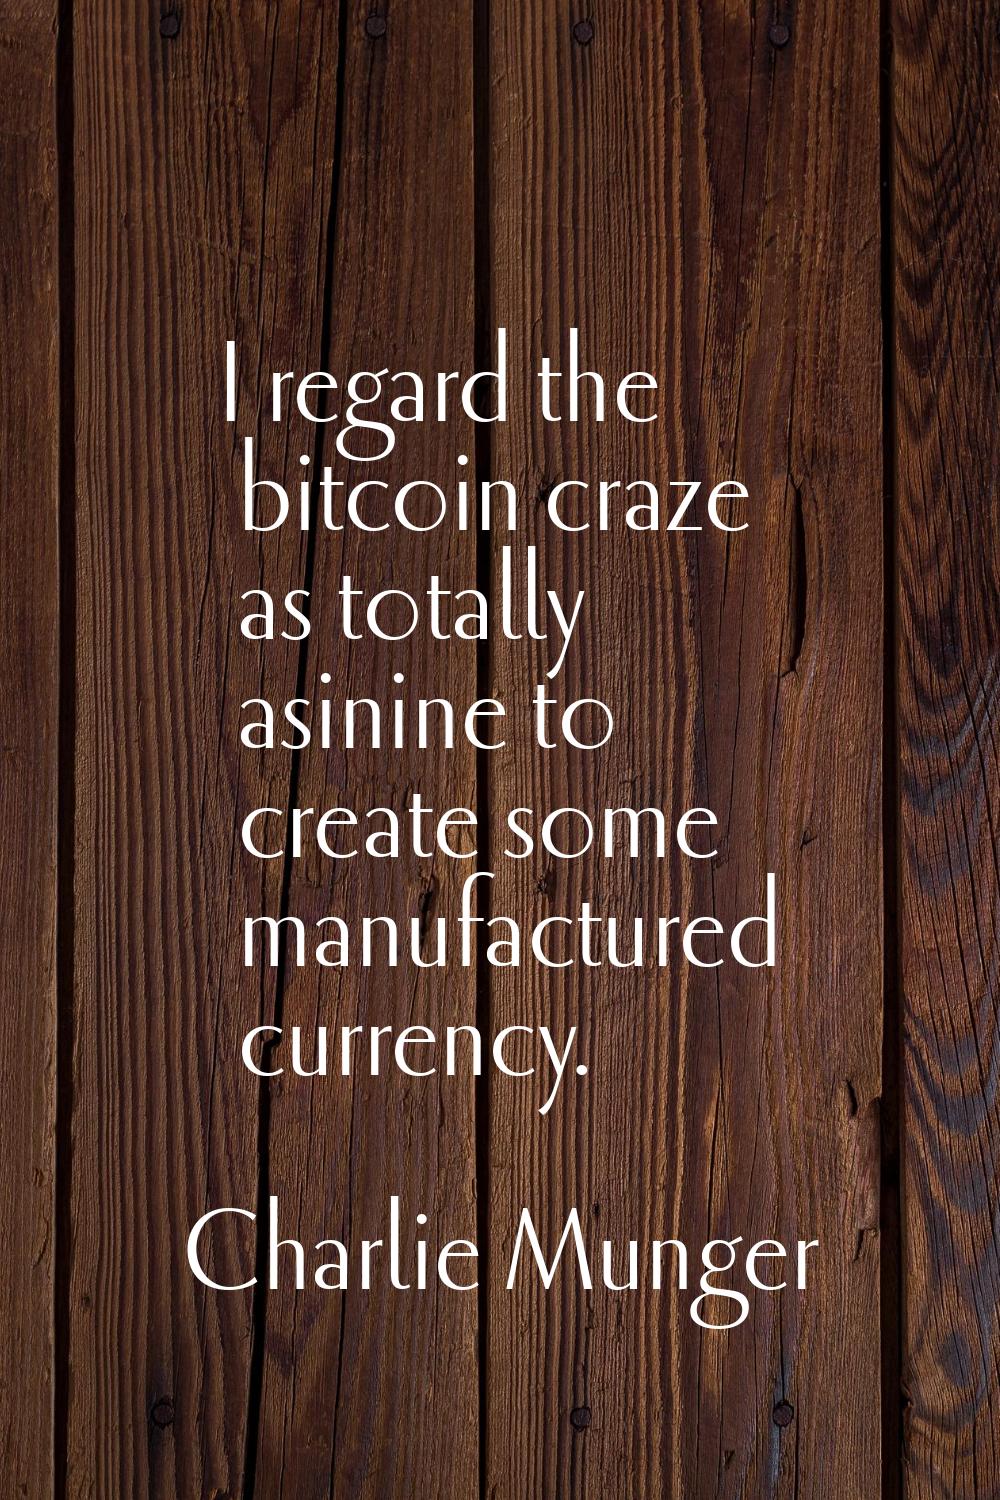 I regard the bitcoin craze as totally asinine to create some manufactured currency.